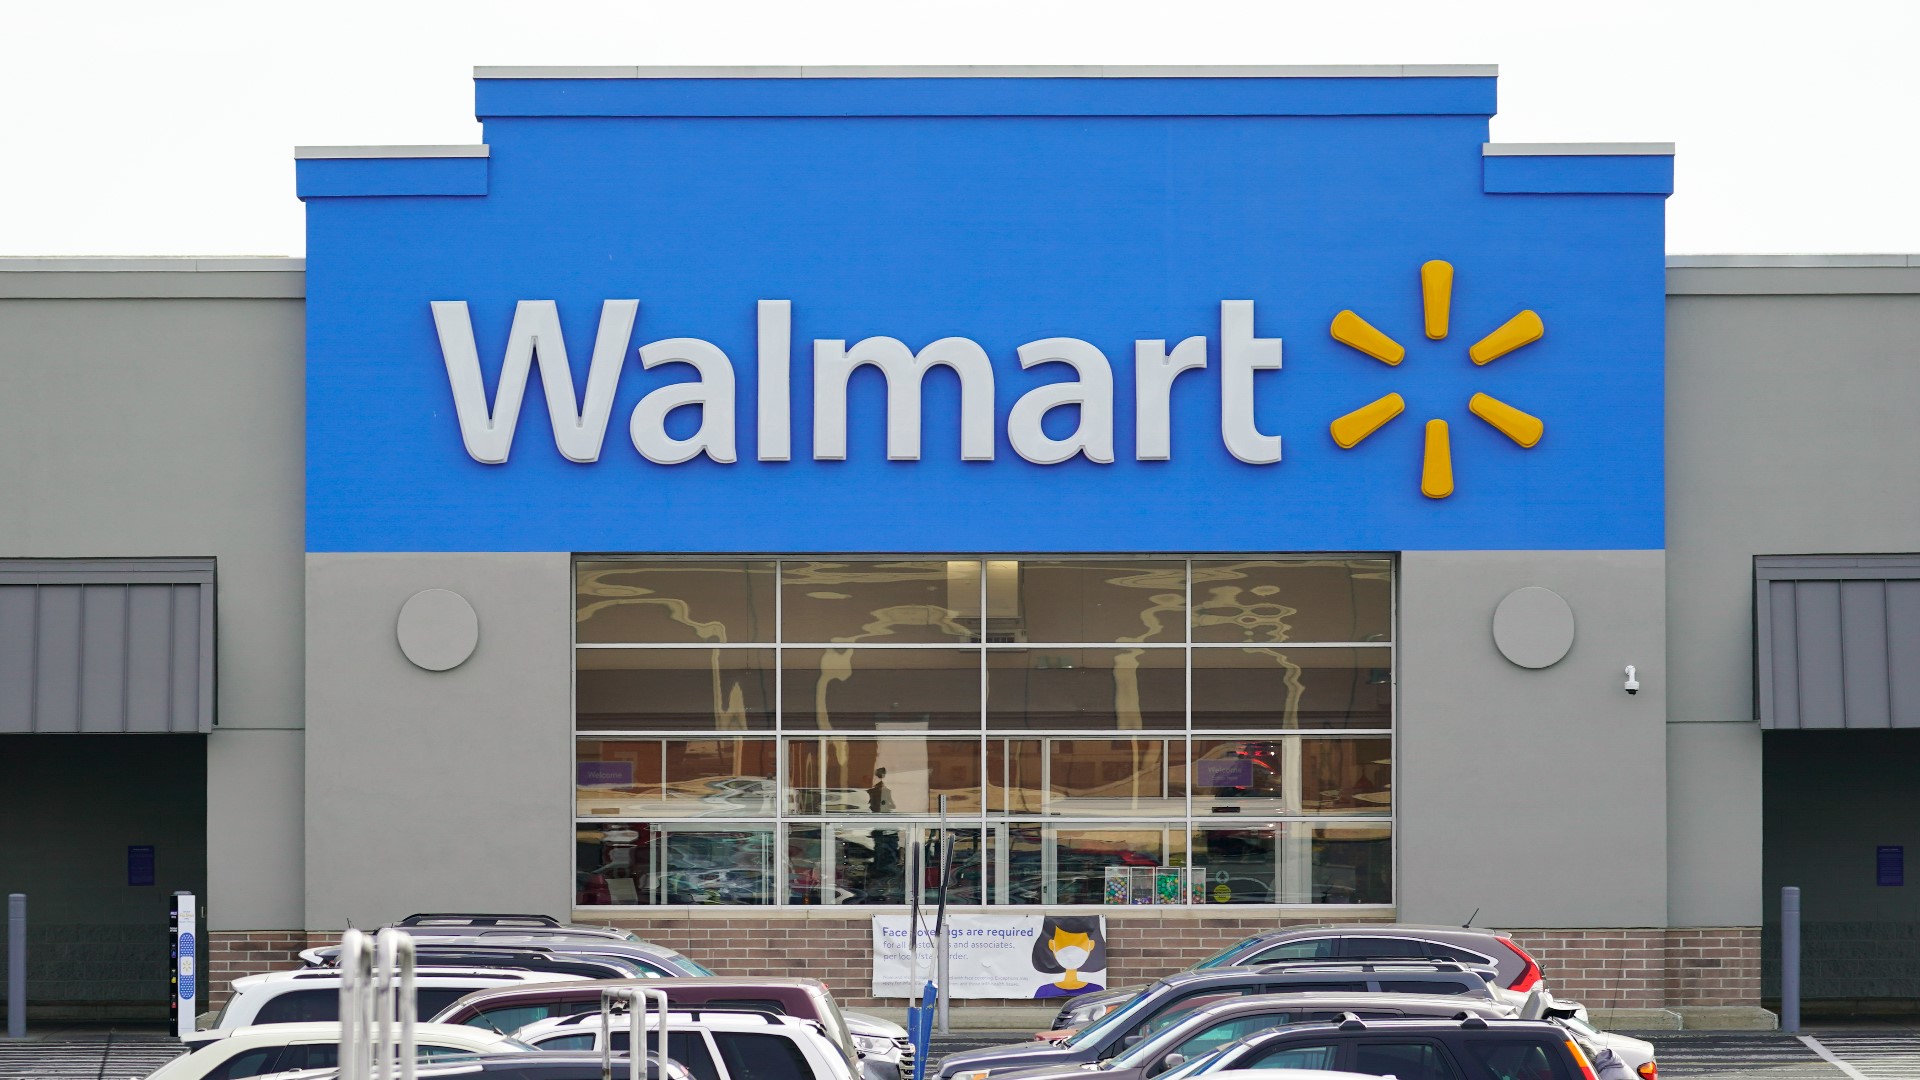 The raises will bring Walmart, the country's largest retailer and biggest private employer, closer to many of its higher-paying competitors.